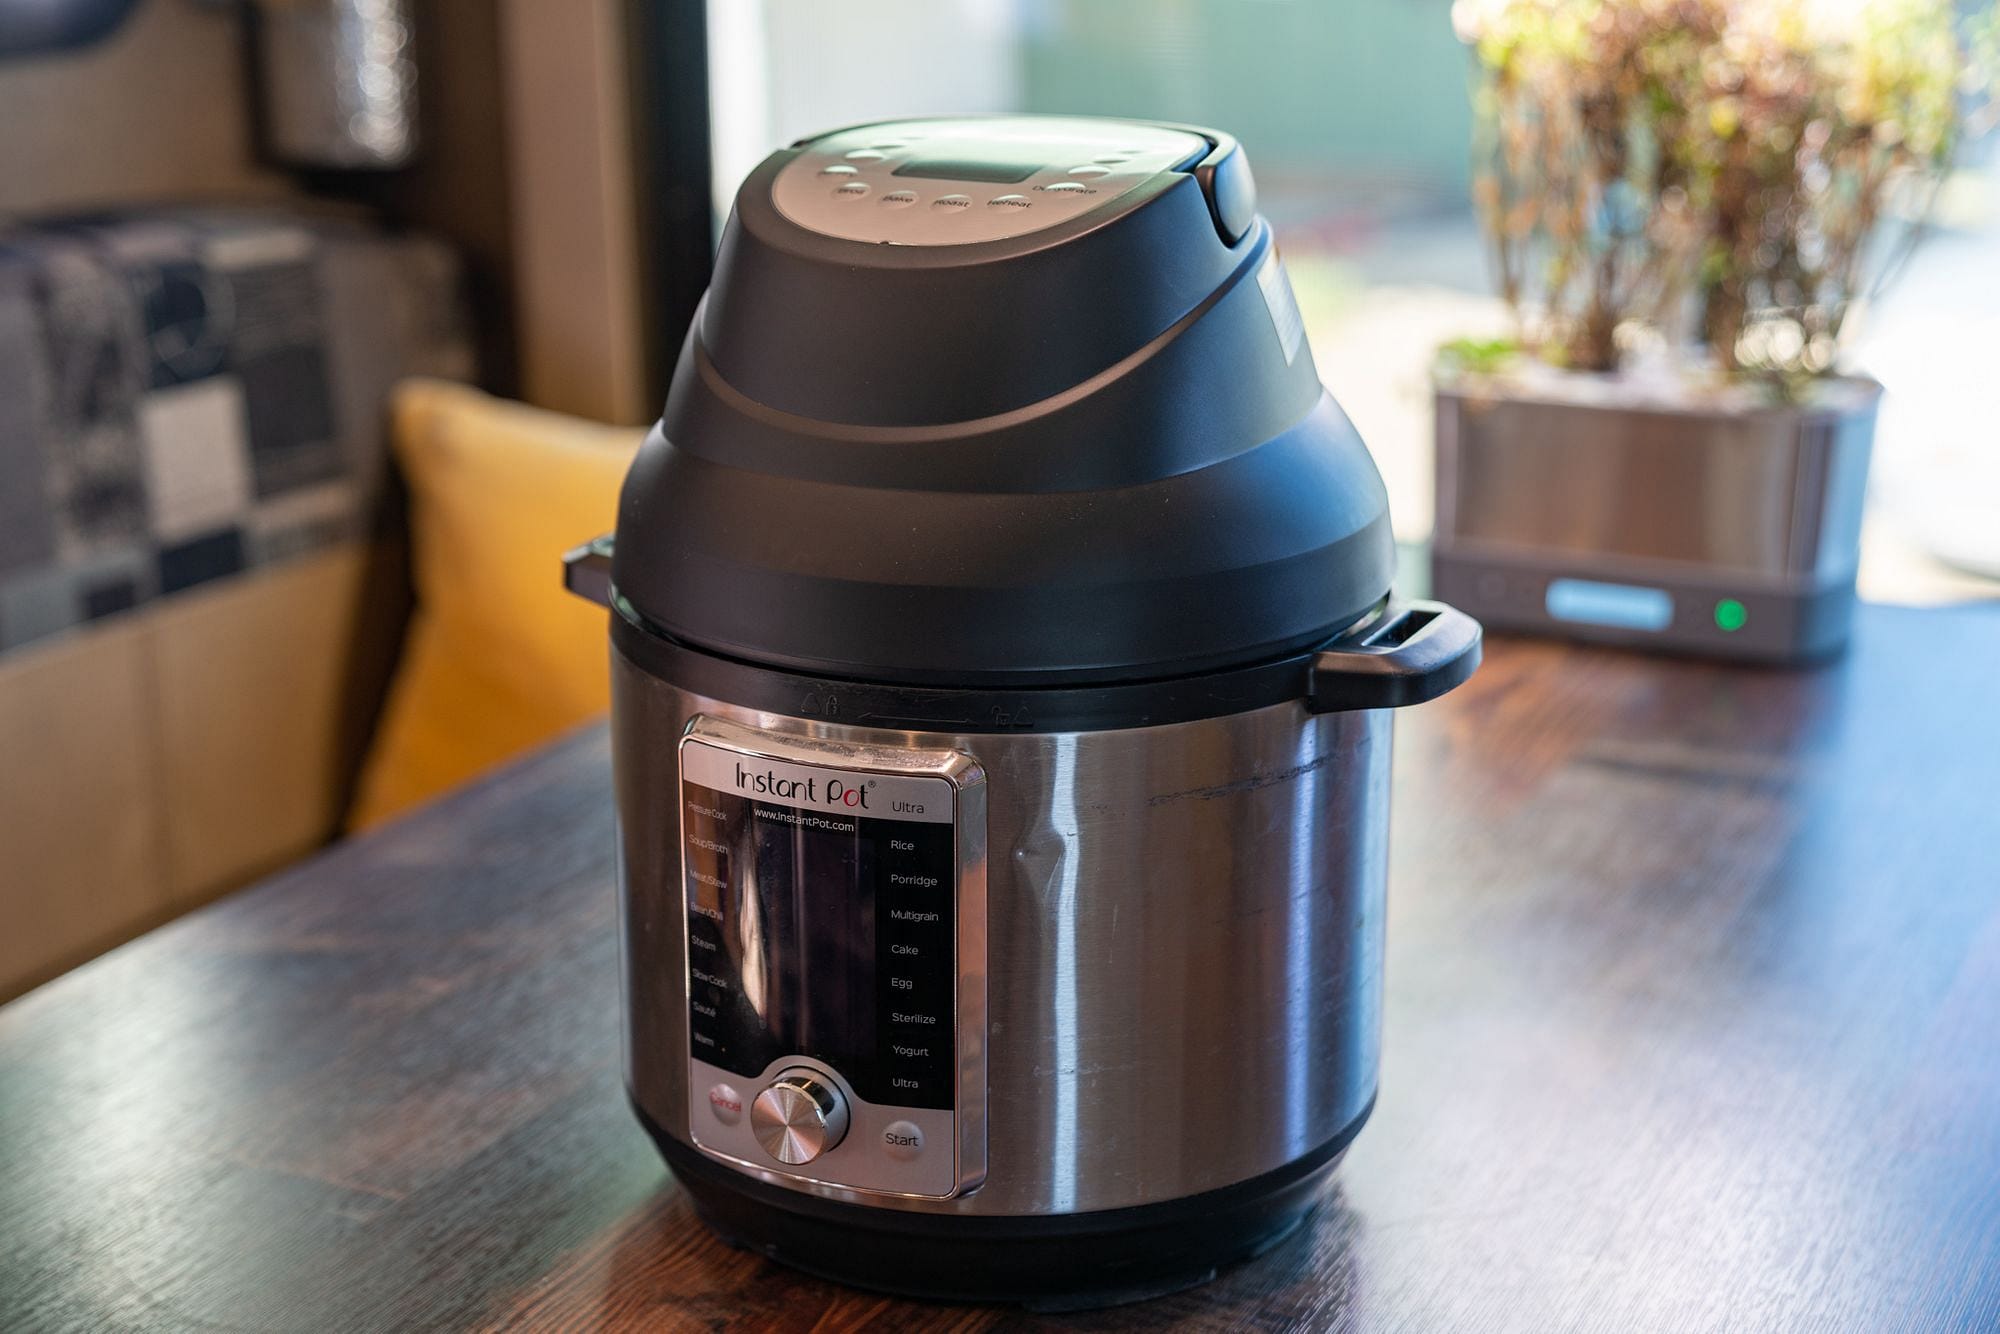 Instant Pot Air Fryer Lid Review: Easy Air Frying